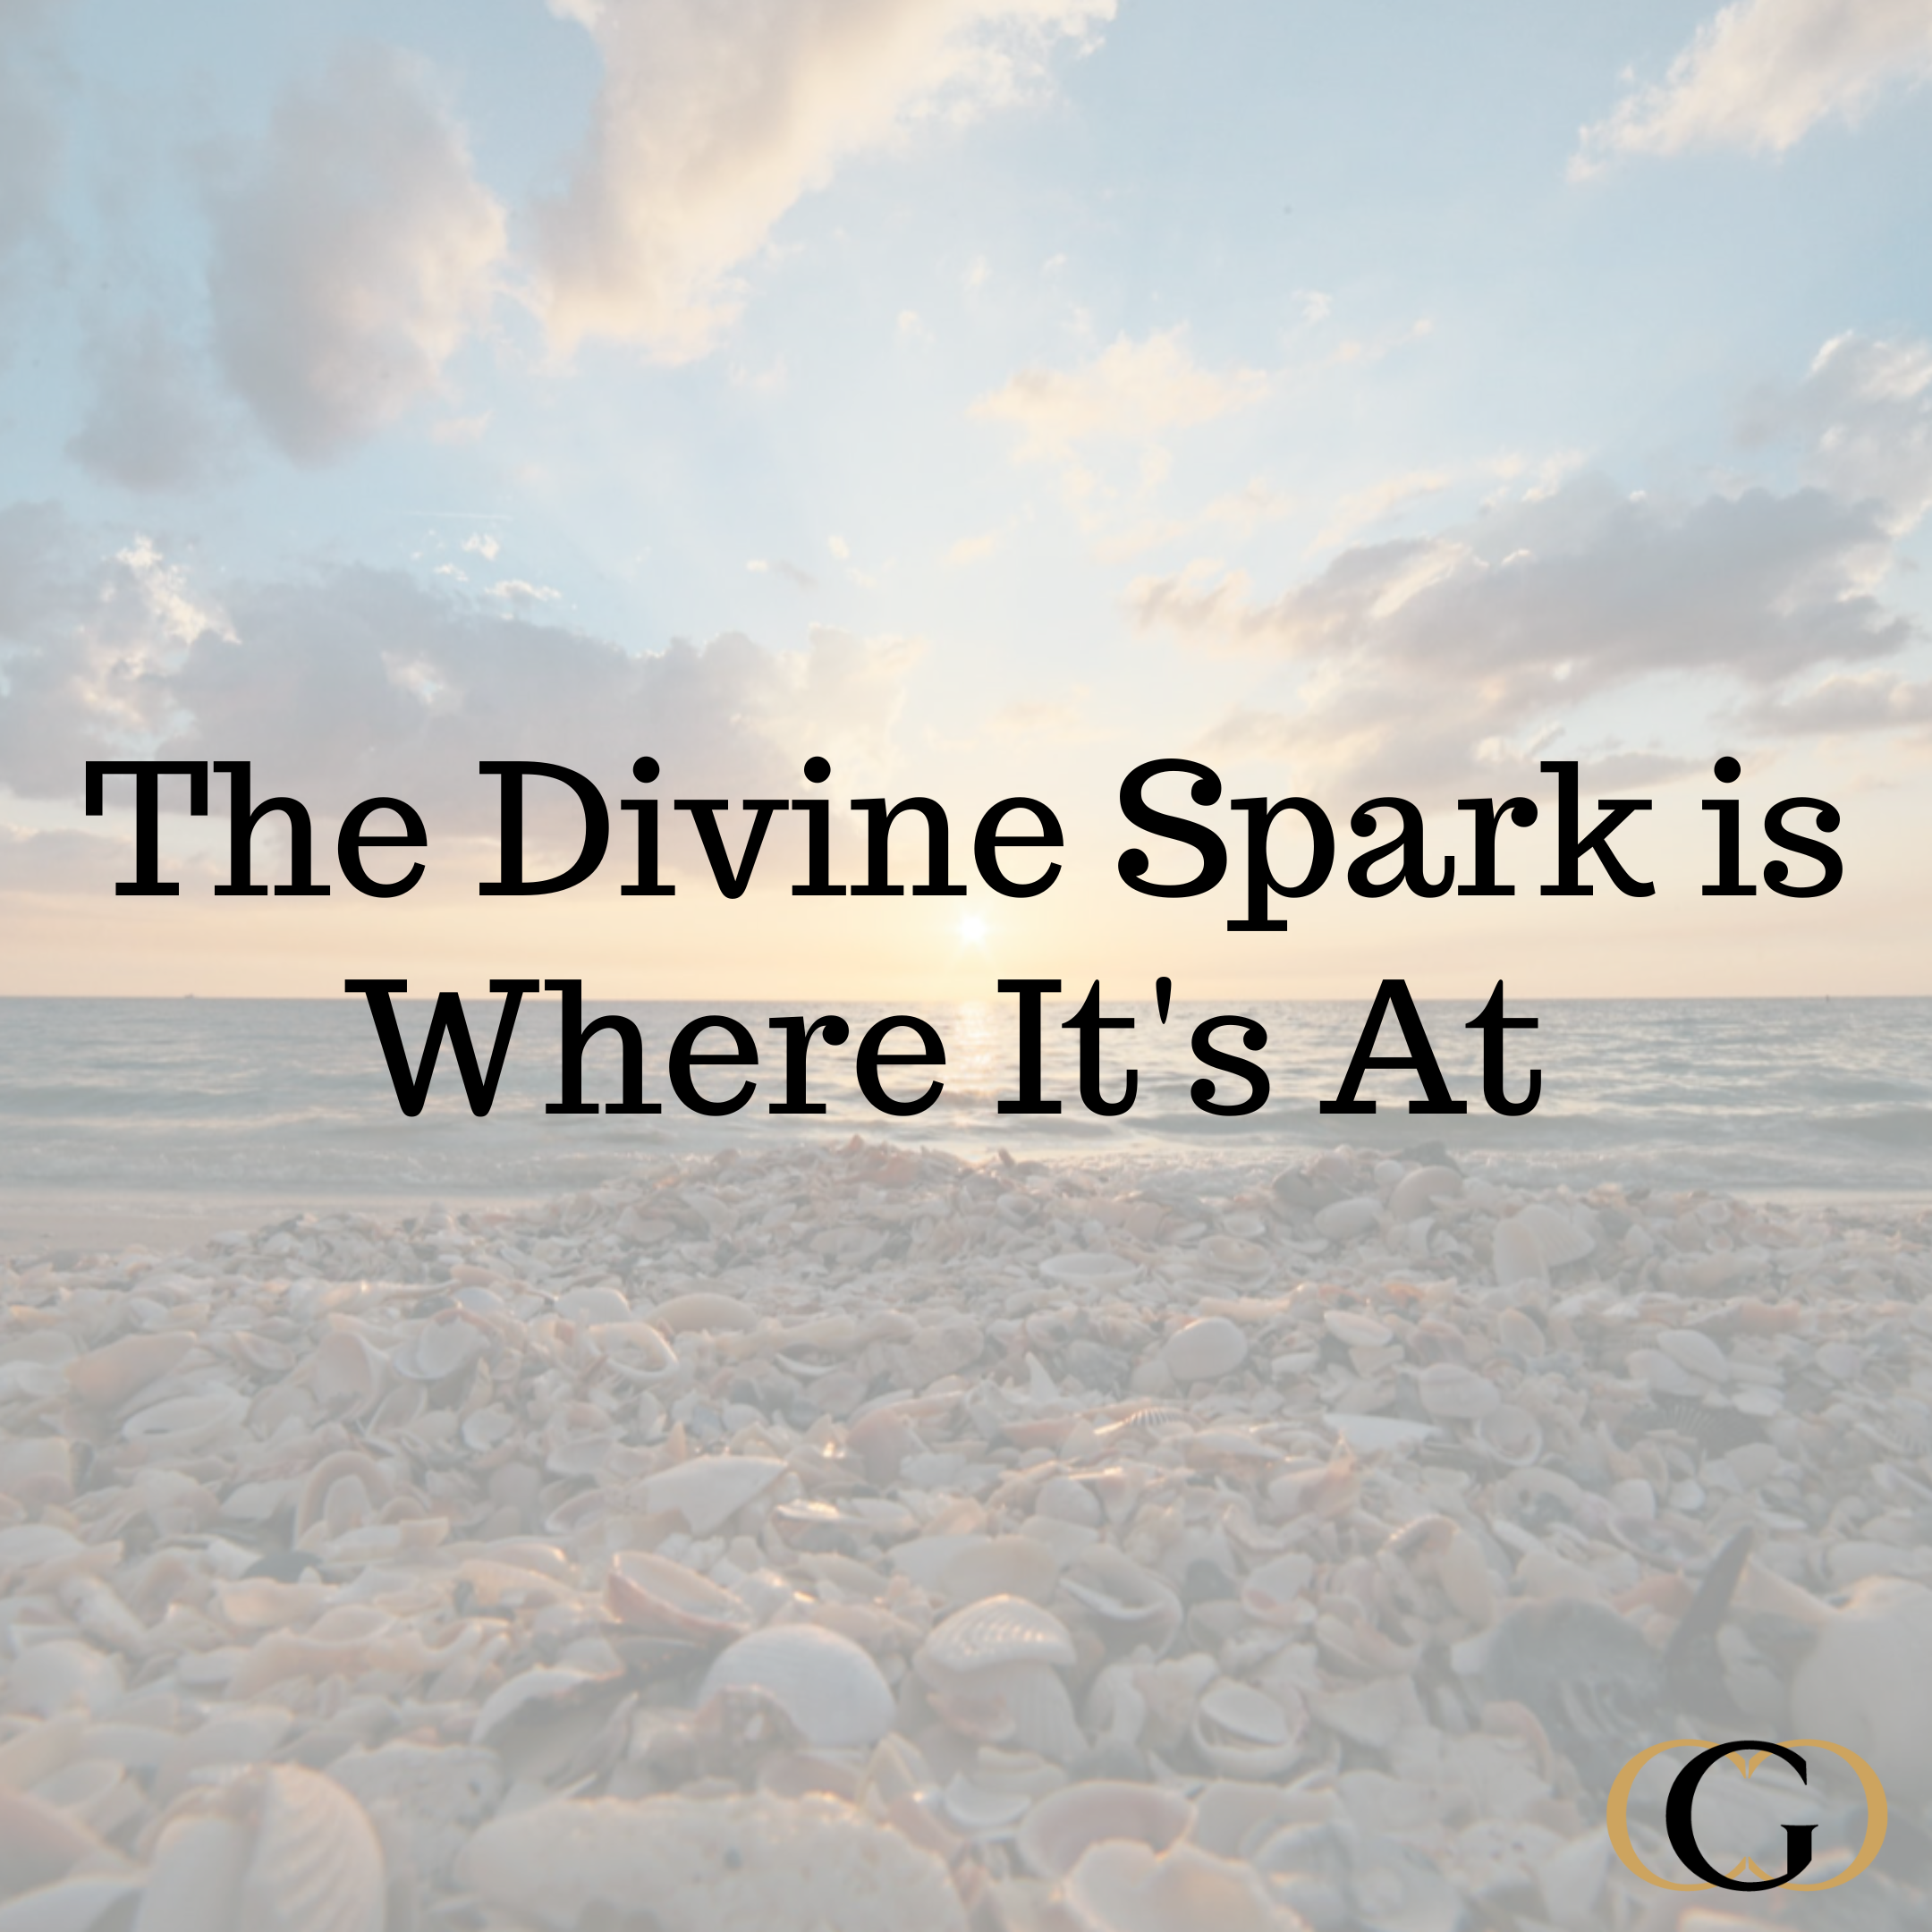 The Divine Spark is Where It's At